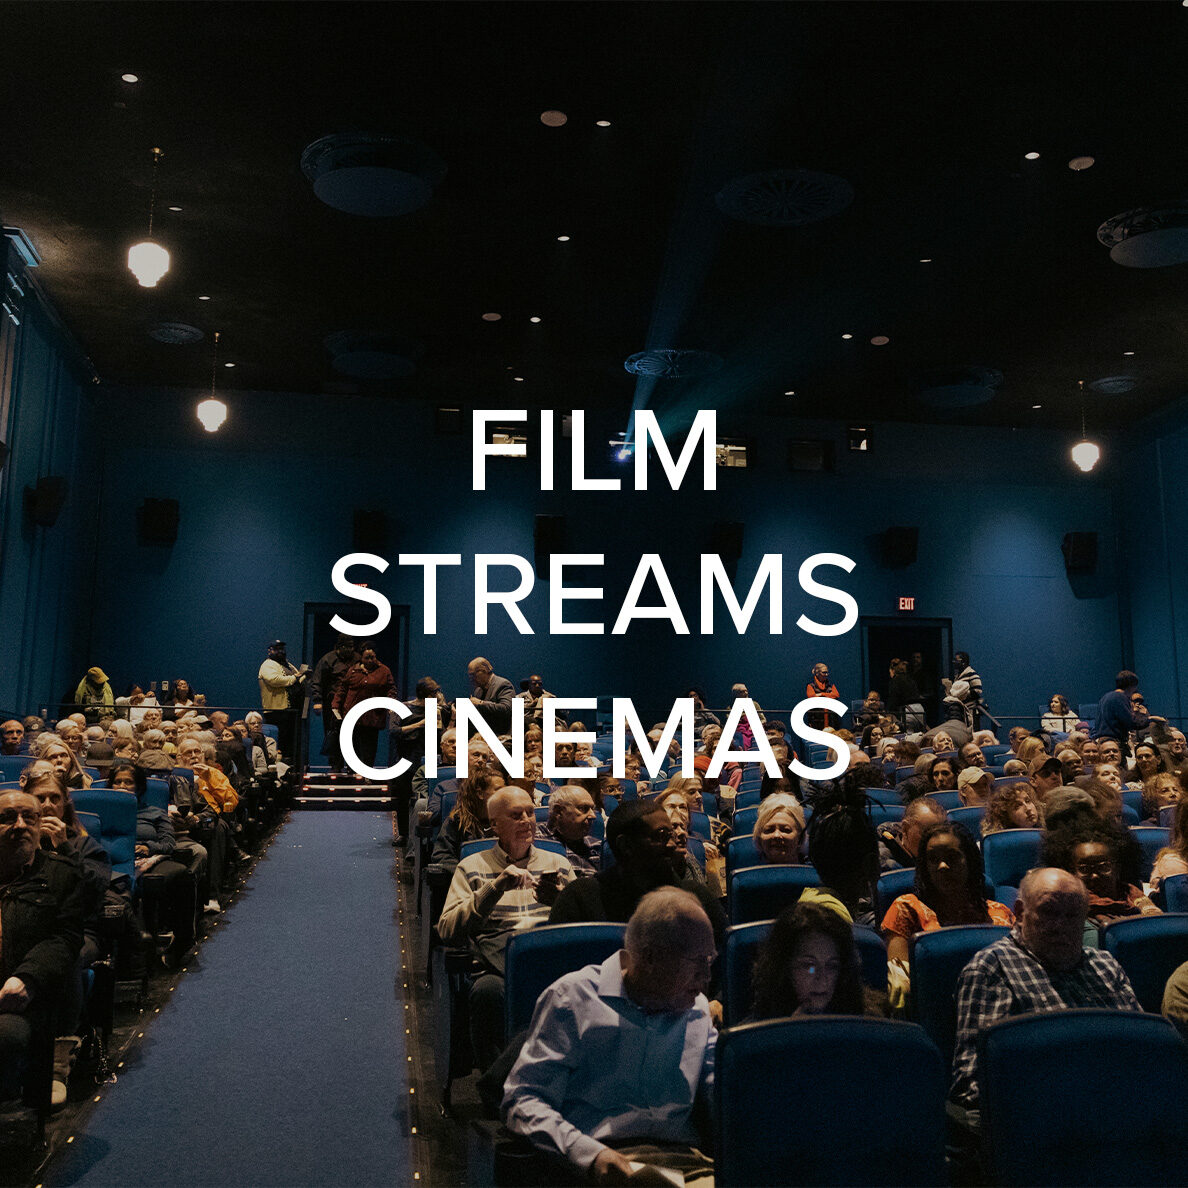 As Film Streams Cinemas' Production Specialist,<br>I create trailers for upcoming series and retrospectives, as well as film <br>and edit live events.